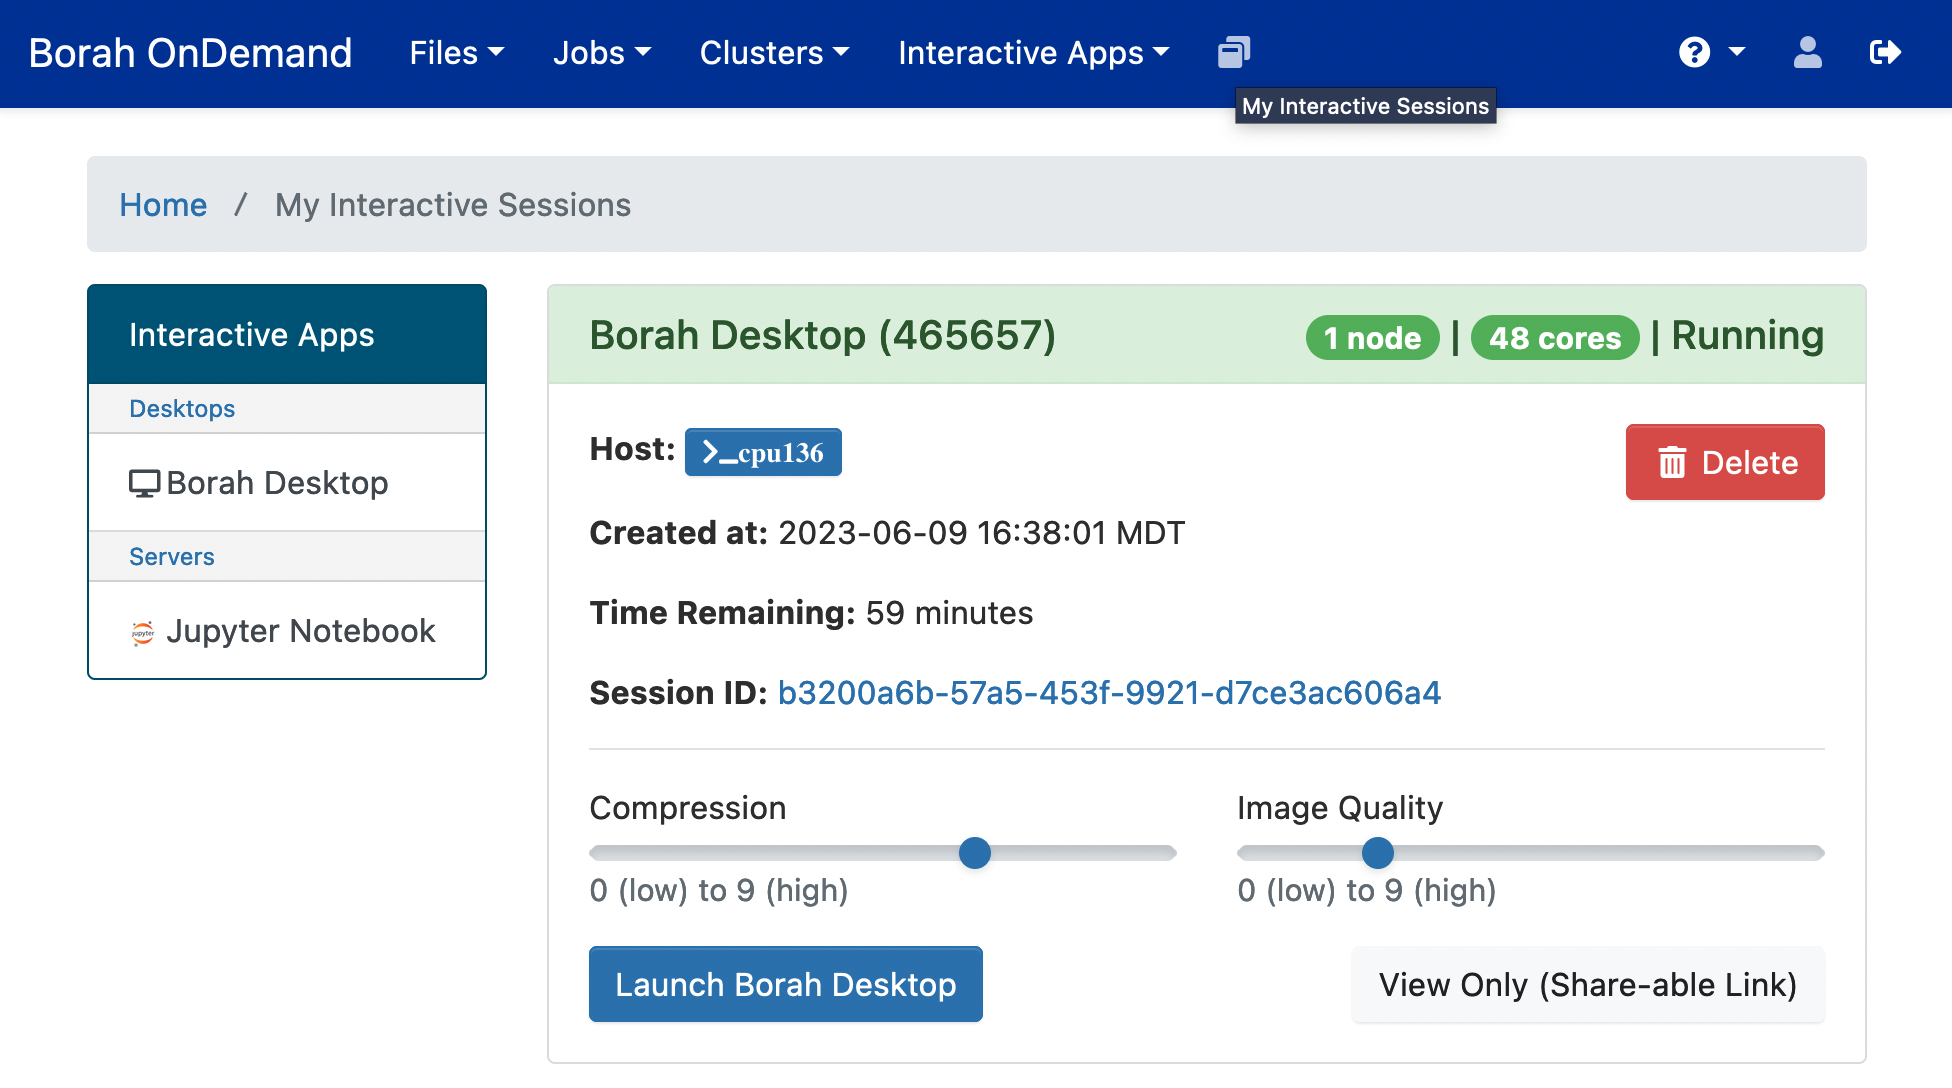 Borah OnDemand showing the My Interactive Sessions page with the icon highlighted